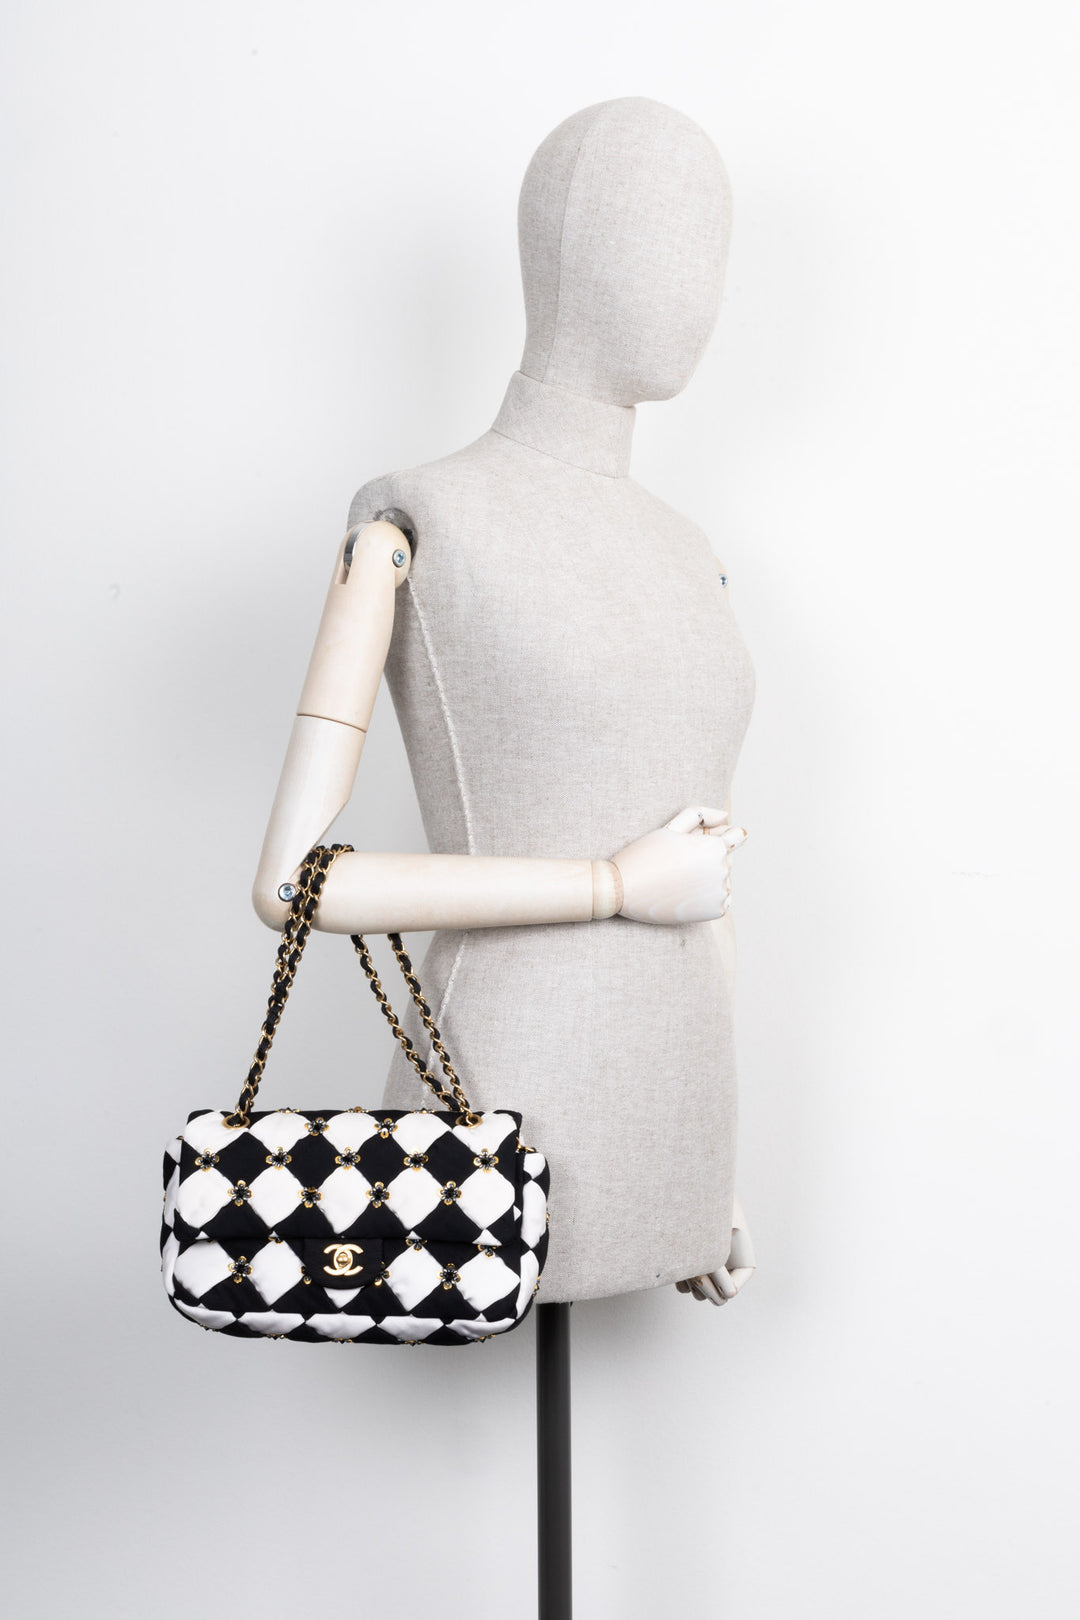 CHANEL Pre Fall 2021 Metier D'Art Checkerboard Embroidered Single Flap Satin